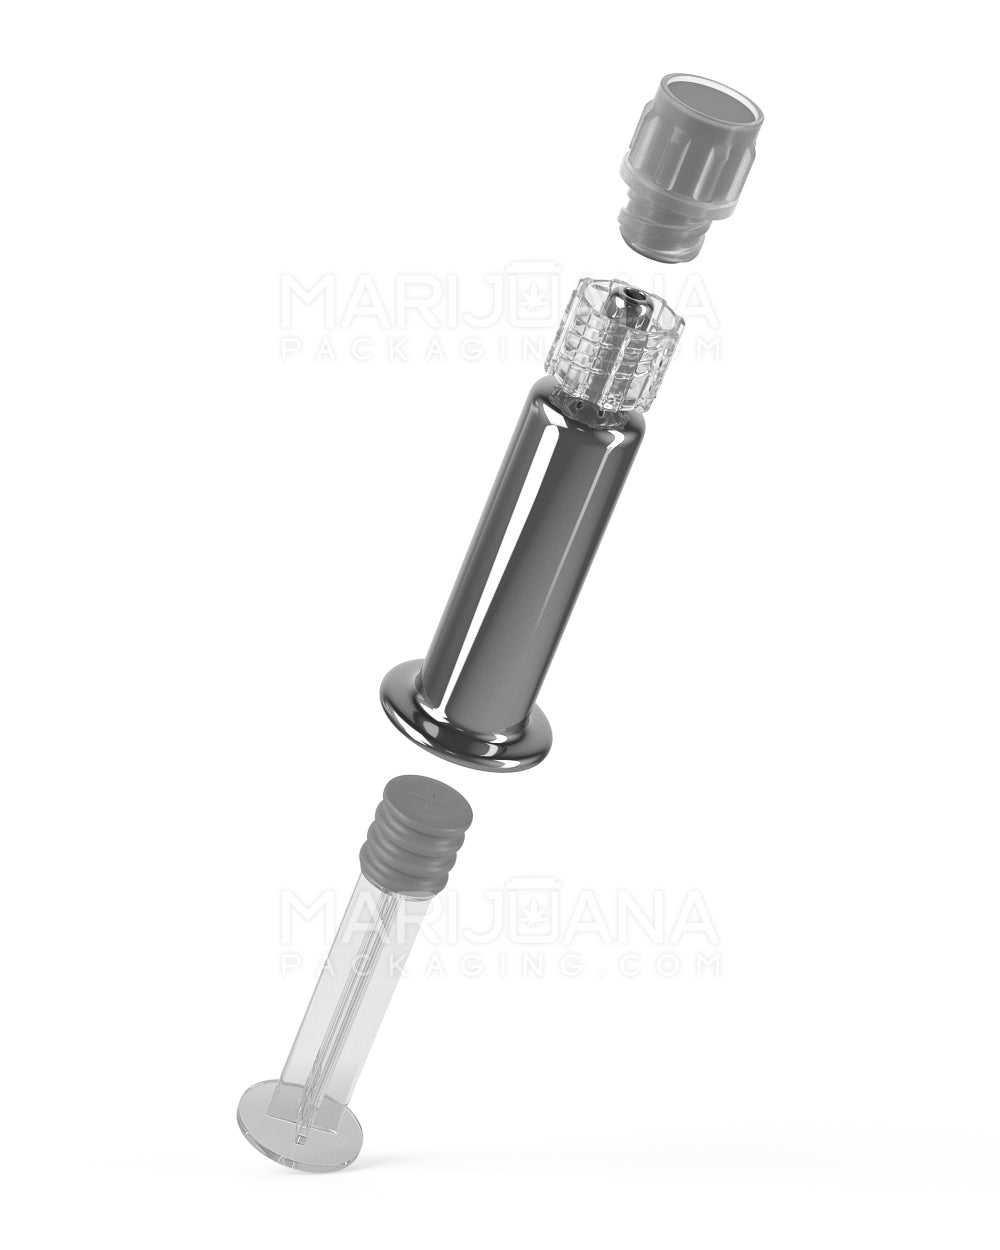 Luer Lock | Silver Glass Dab Applicator Syringes | 1mL - No Measurements - 100 Count - 6